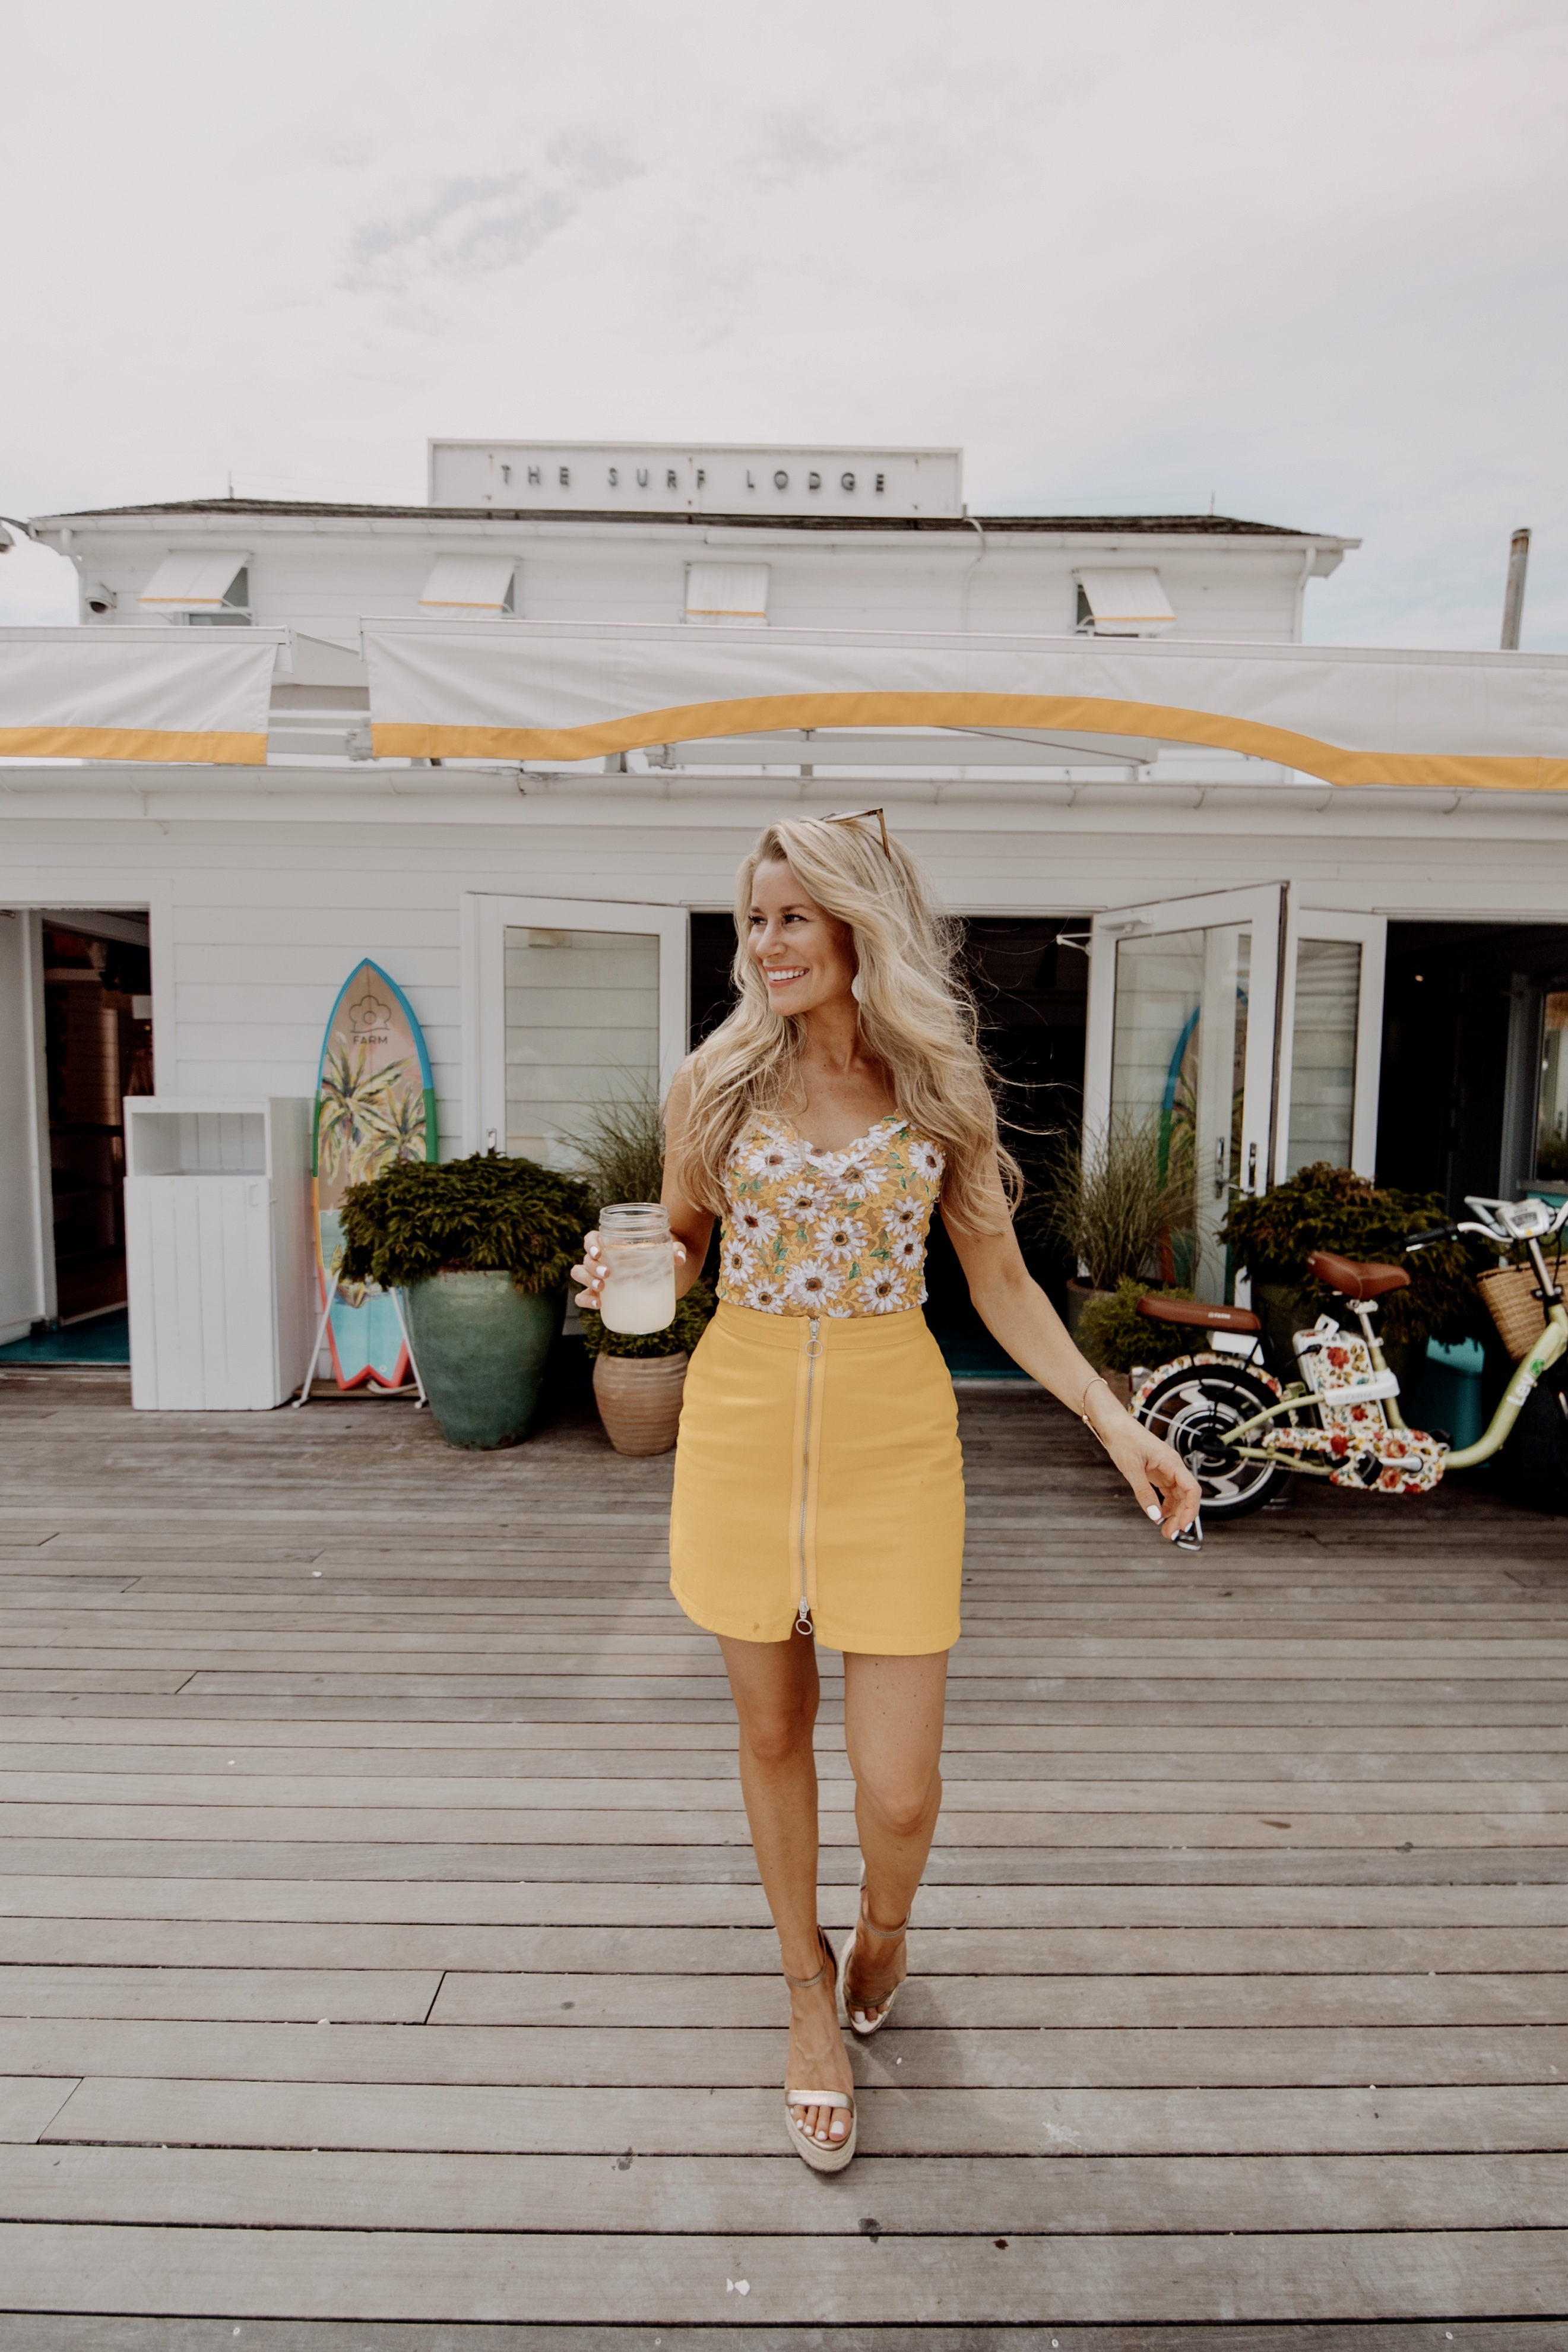 hamptons outfit, hamptons trip, casual outfit, vacation outfit, cute outfit idea, summer 2019 fashion